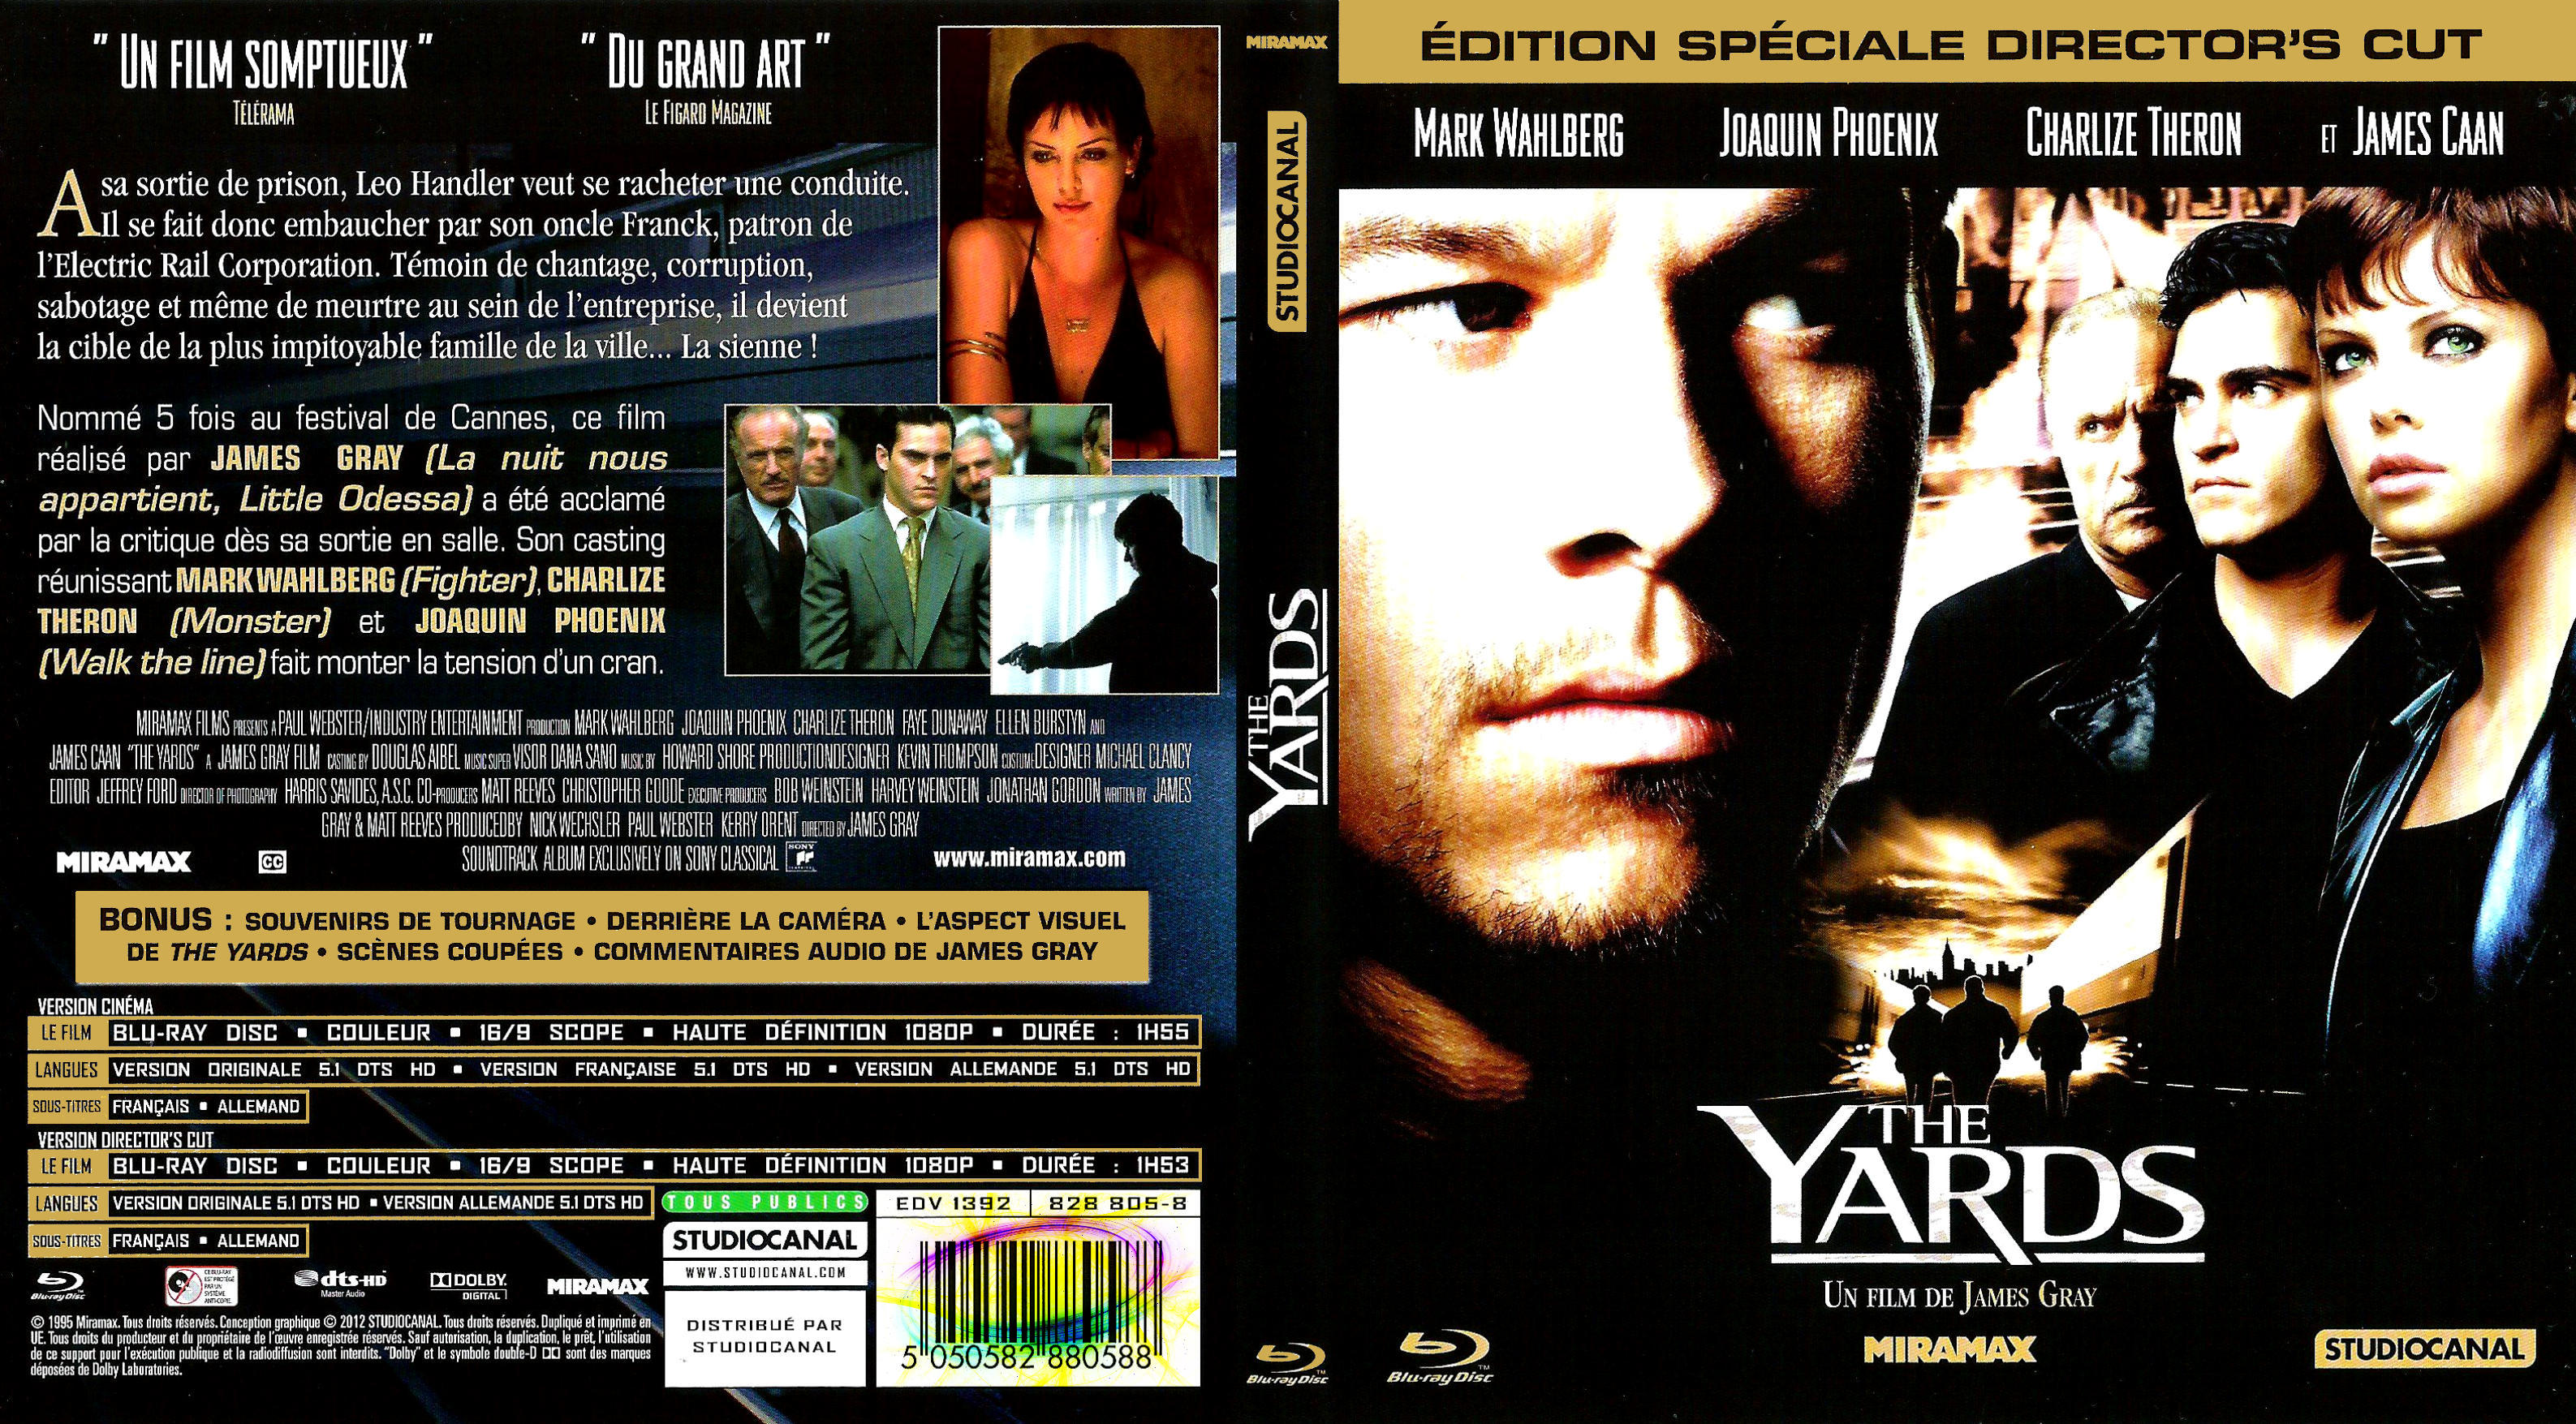 Jaquette DVD The yards (BLU-RAY) v2